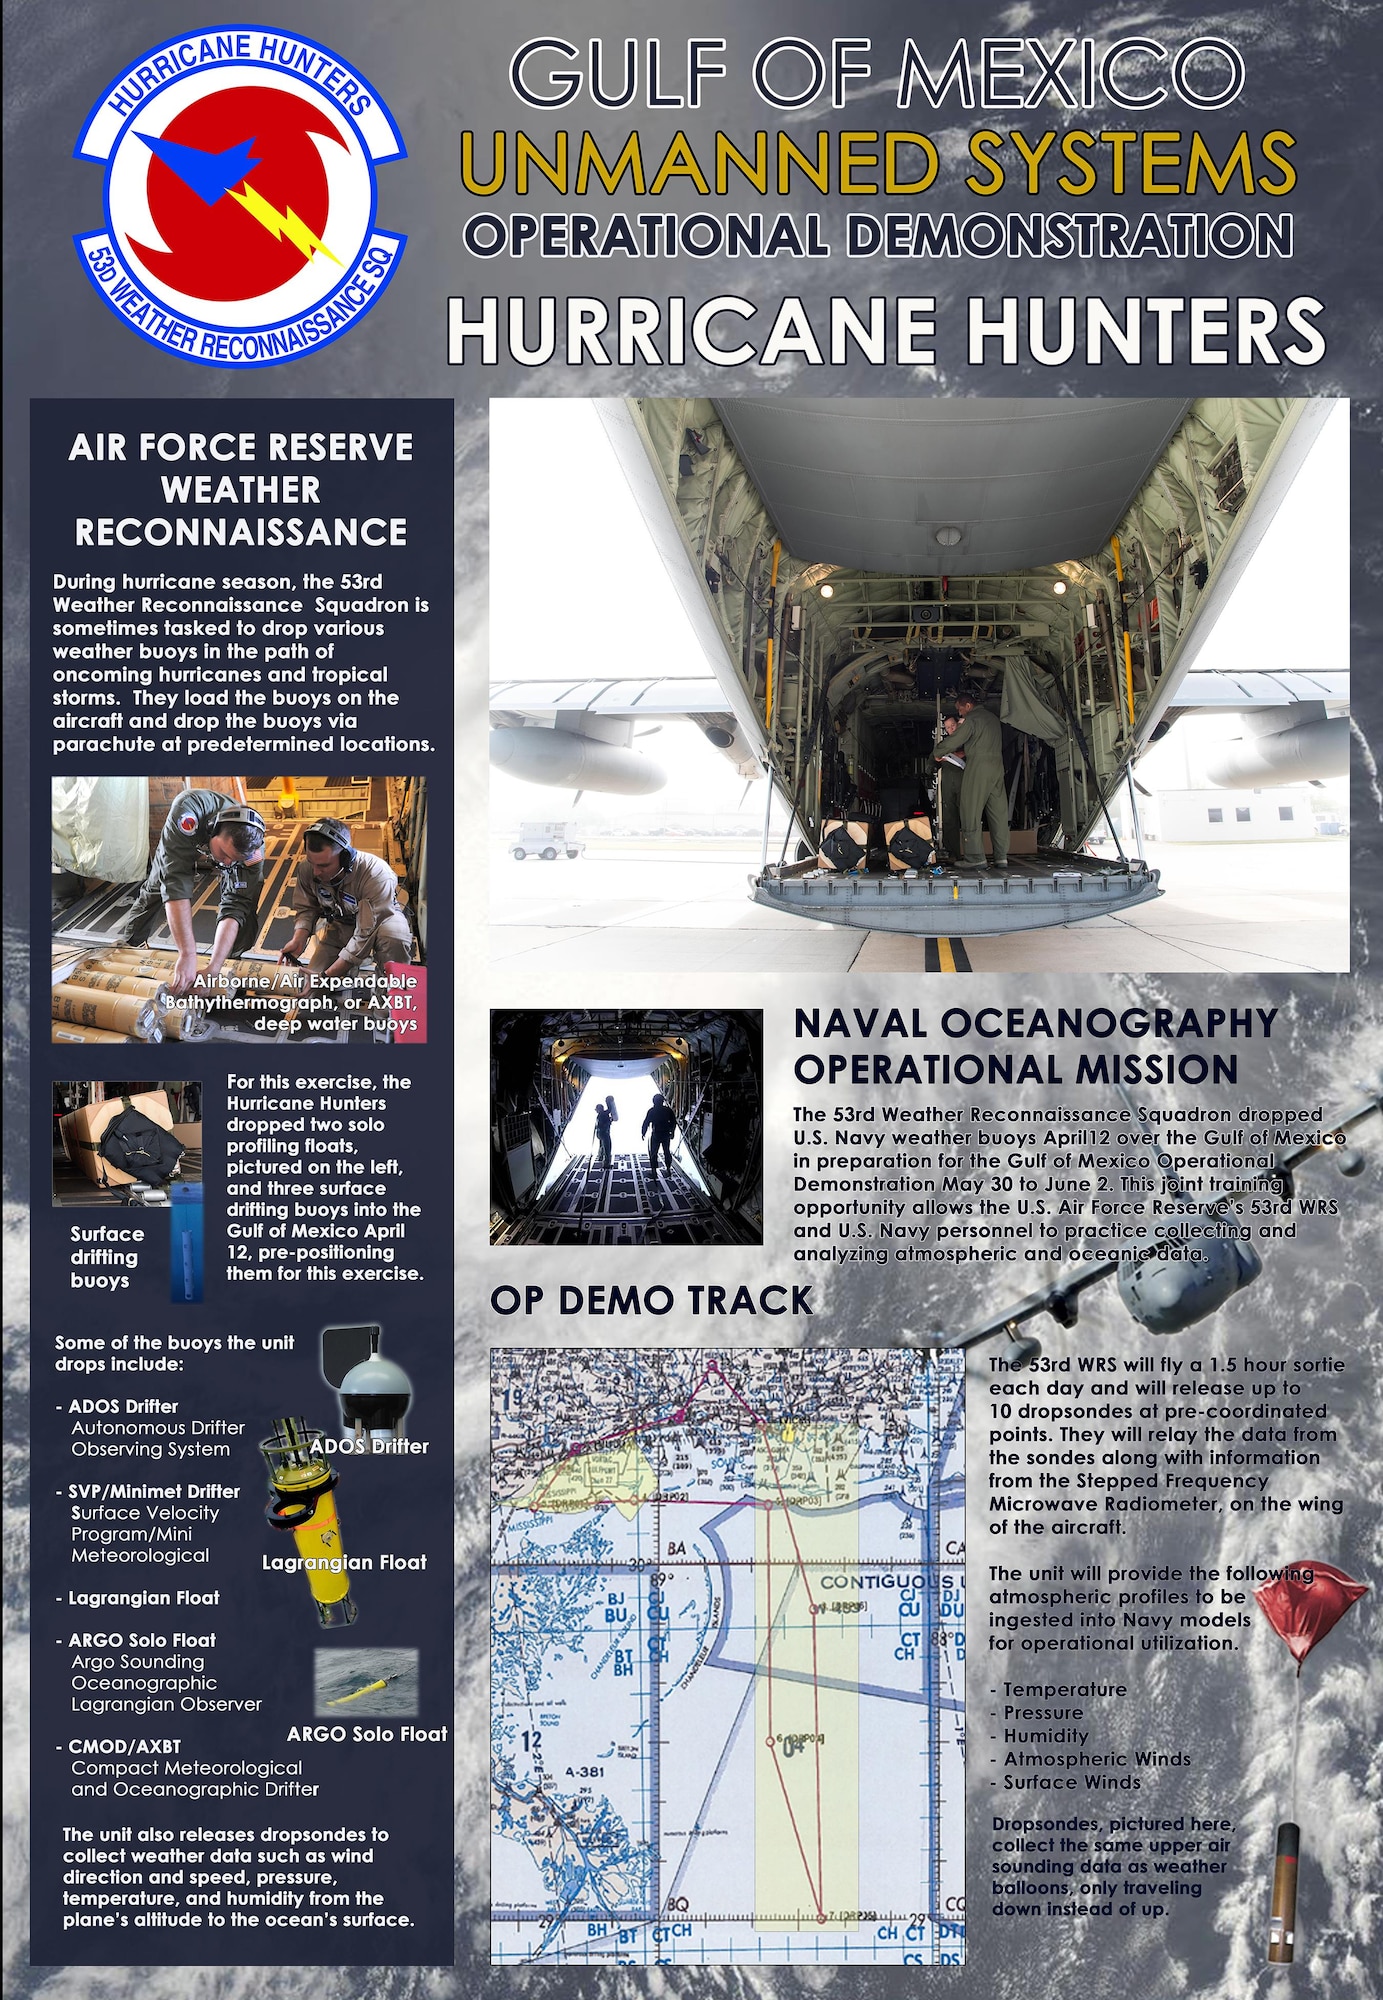 Air Force Reserve Citizen Airmen with the 53rd Weather Reconnaissance Squadron, Keesler Air Force Base, Mississippi, provide weather data to the National Hurricane Center in Miami. While this may be their typical mission, the “Hurricane Hunters” spent May 30 to June 1, 2017, providing weather information for the U.S. Navy’s first Gulf of Mexico Oceanography Unmanned Systems Operational Demonstration. The squadron partnered with the U.S. Navy, dropping buoys and dropsondes to collect weather information for the event, to demonstrate unmanned capabilities and explore joint opportunities in support of national defense. (Photo Illustration/Maj. Marnee A.C. Losurdo)